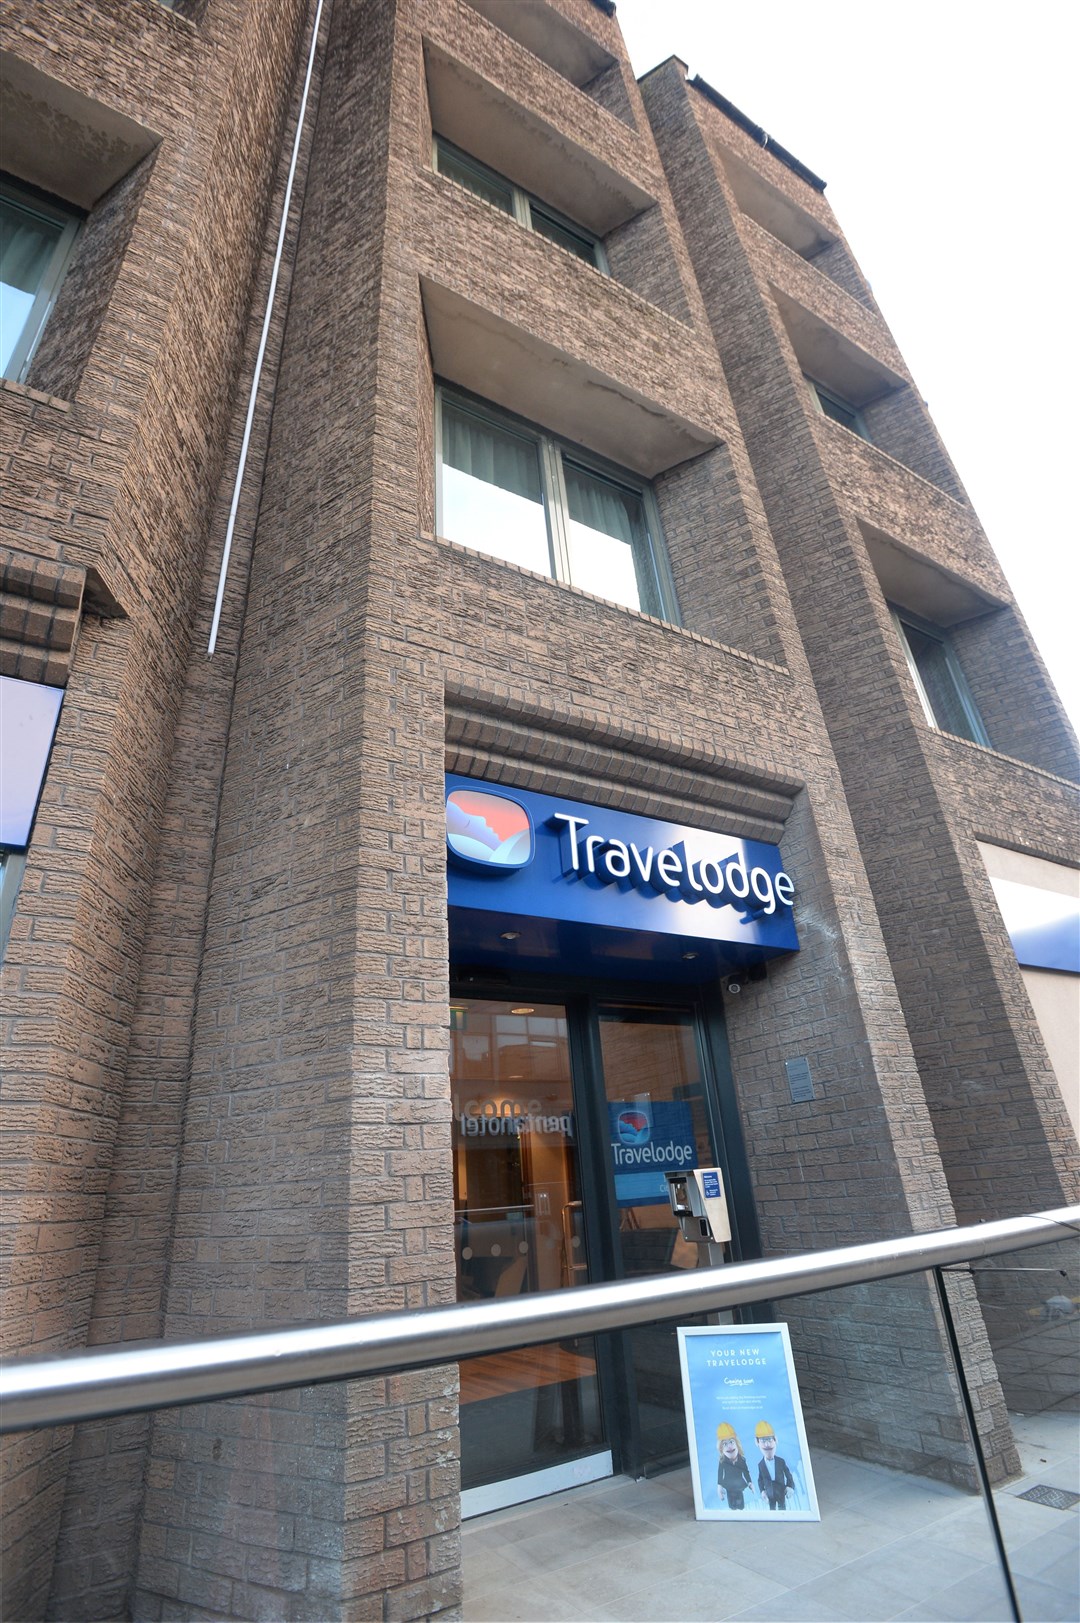 The Travelodge in Academy Street, Inverness.